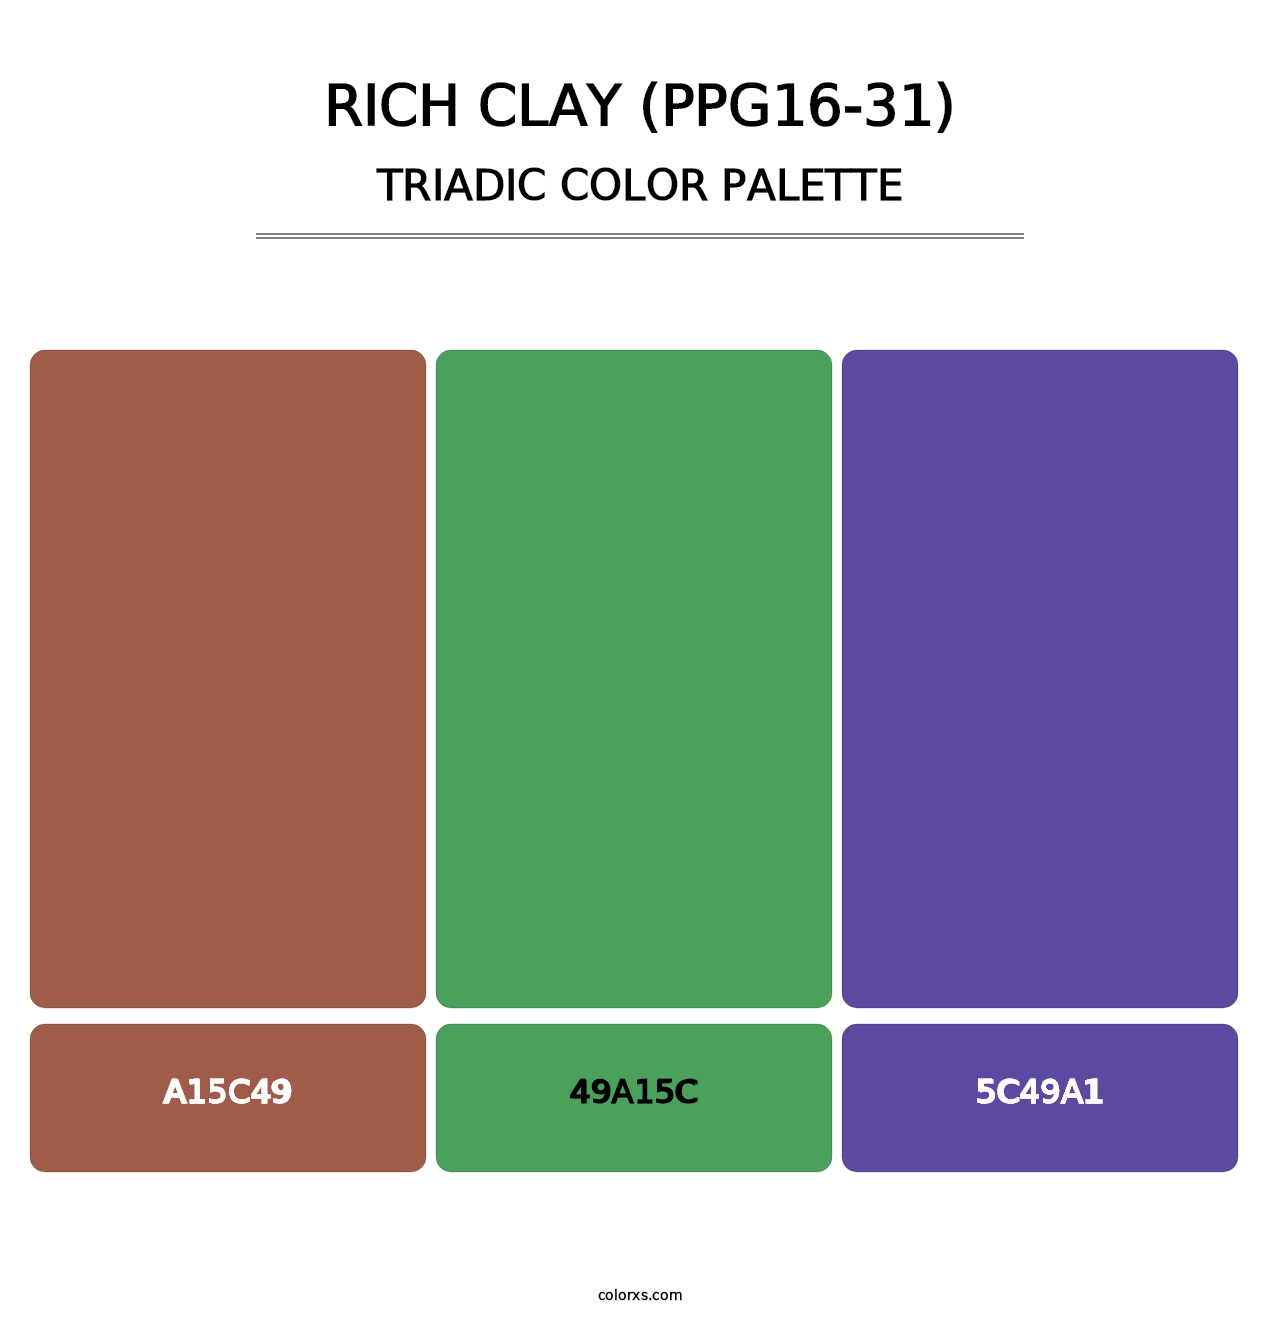 Rich Clay (PPG16-31) - Triadic Color Palette